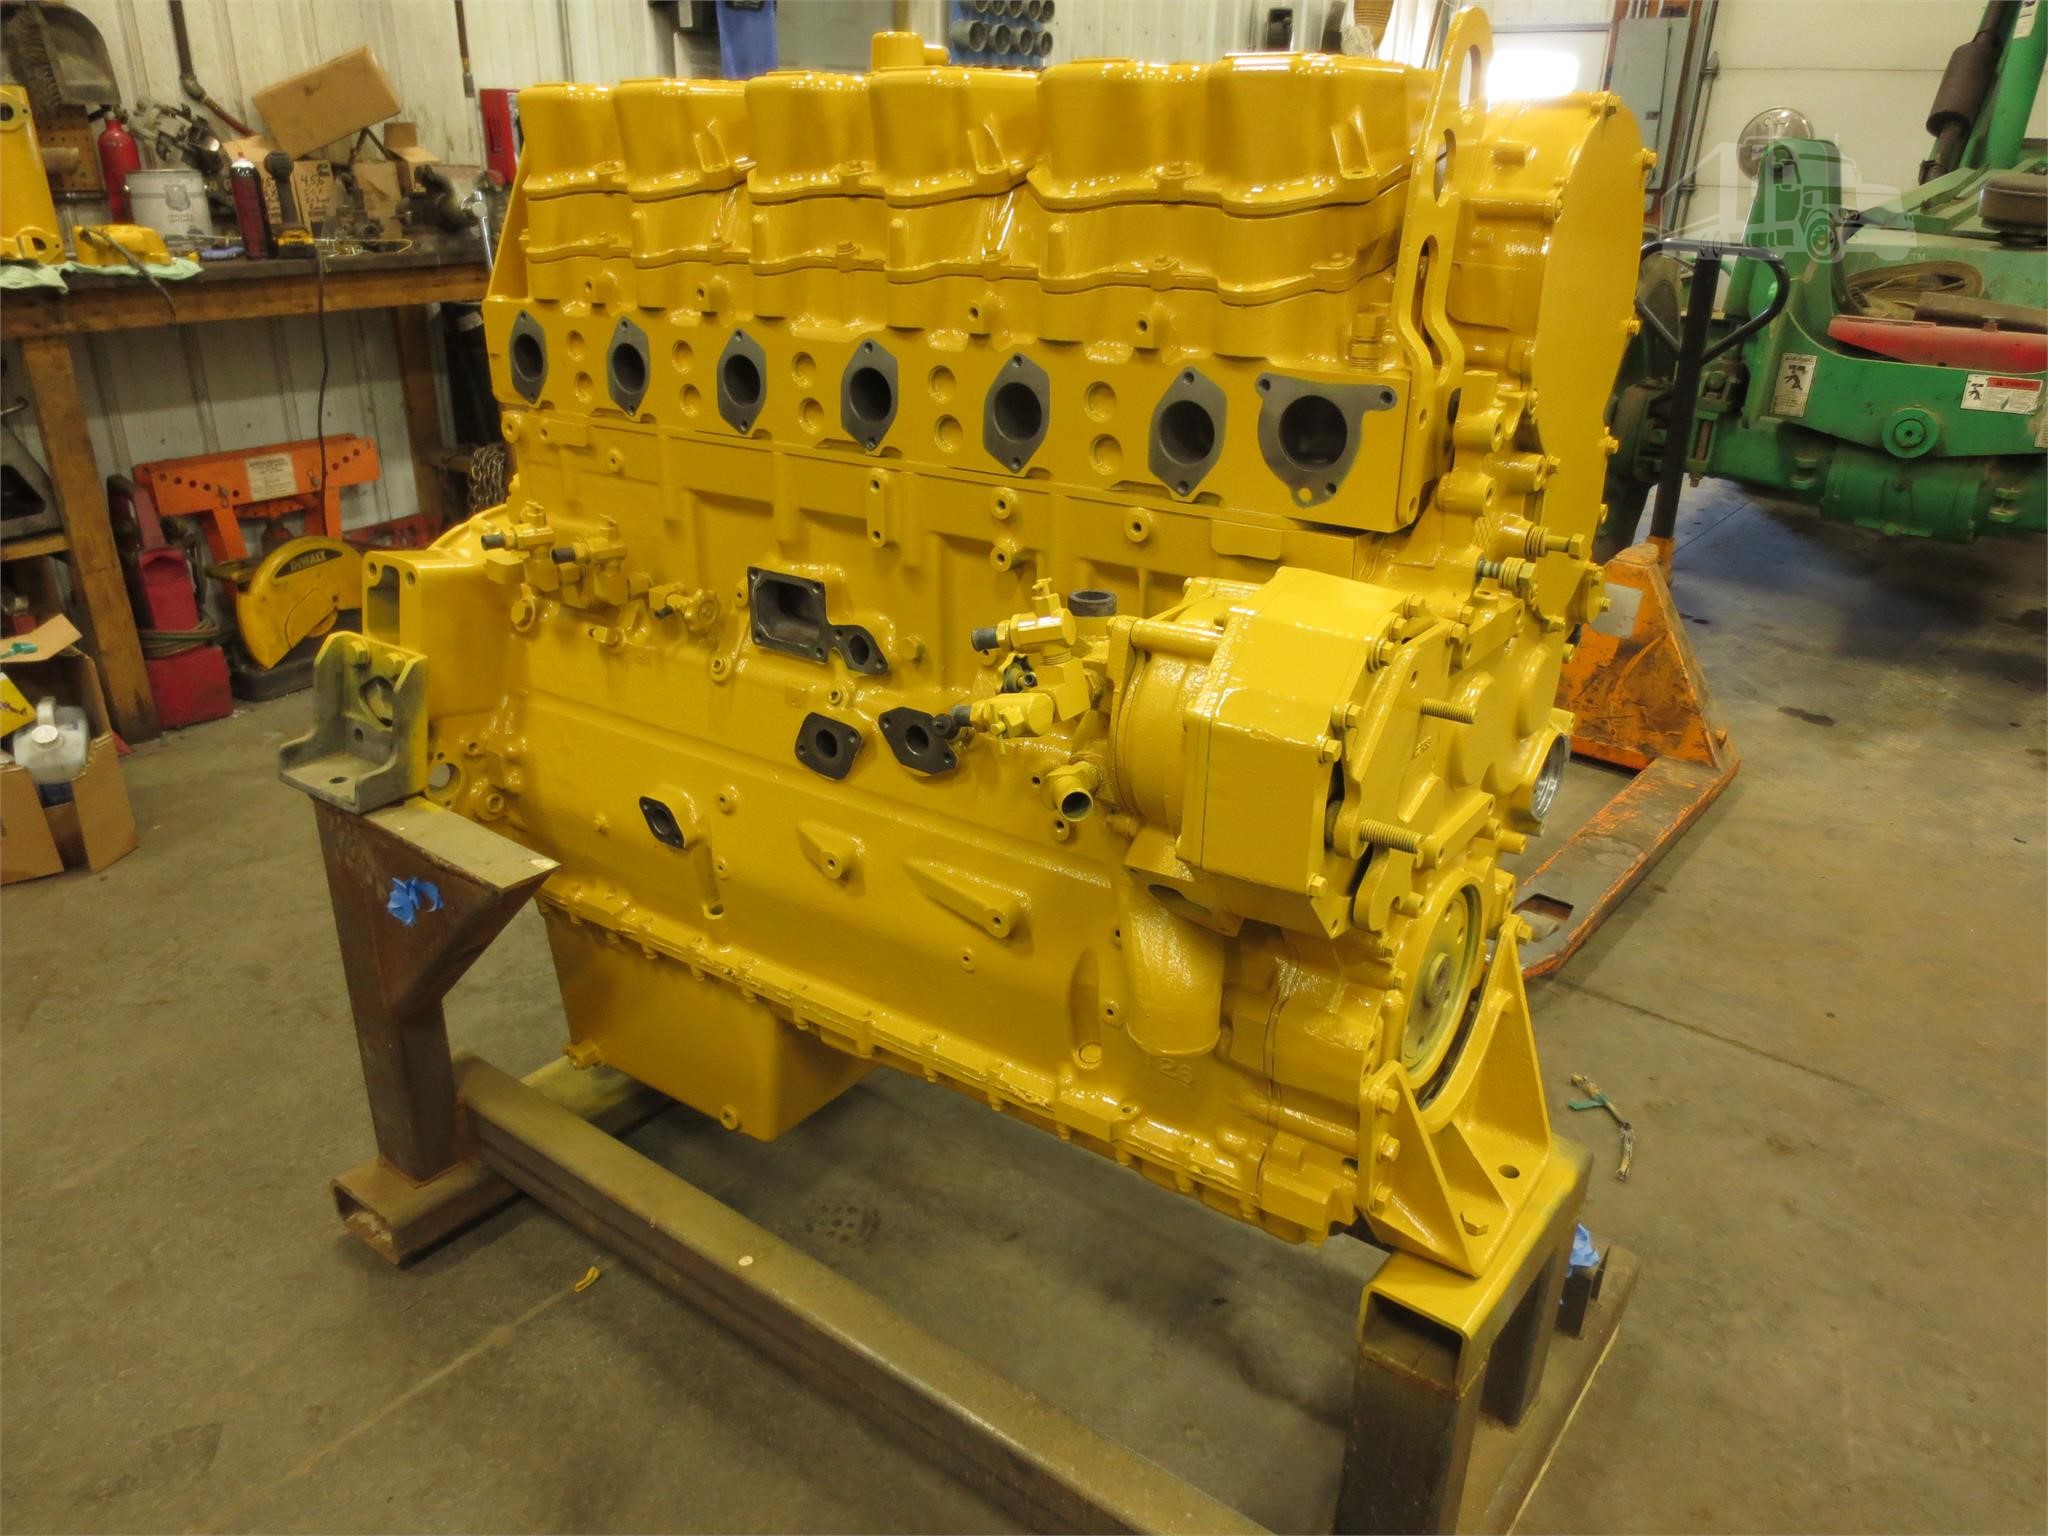 1996 CAT 3406E Engine For Sale In Eau Galle, Wisconsin